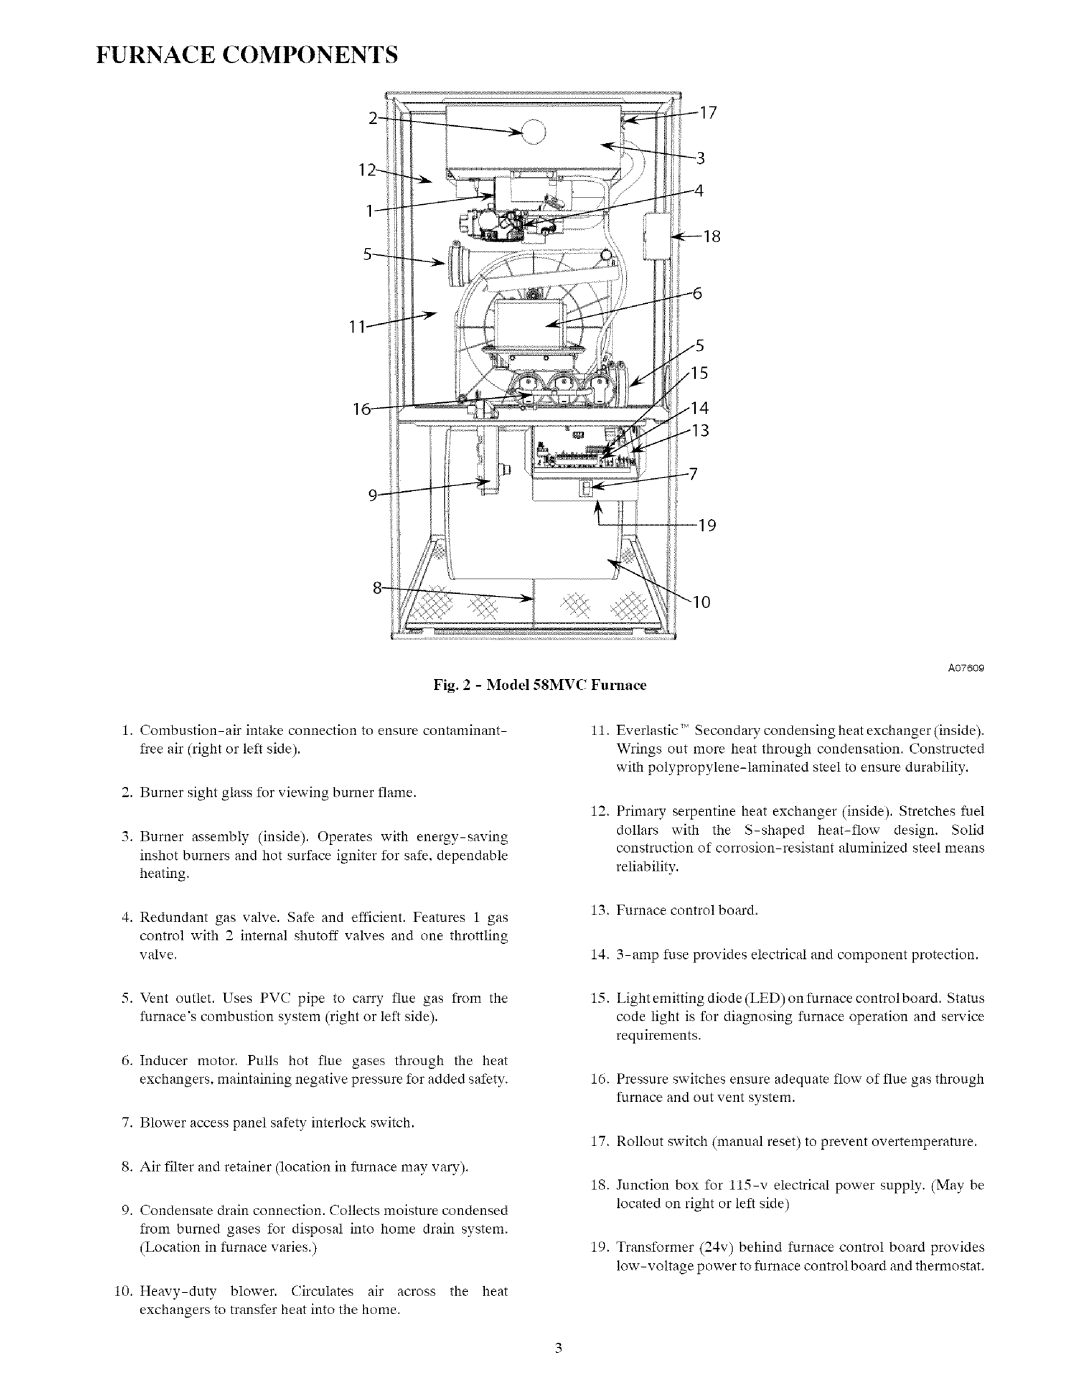 Carrier 58MVC owner manual Furnace, Components, 1-13 